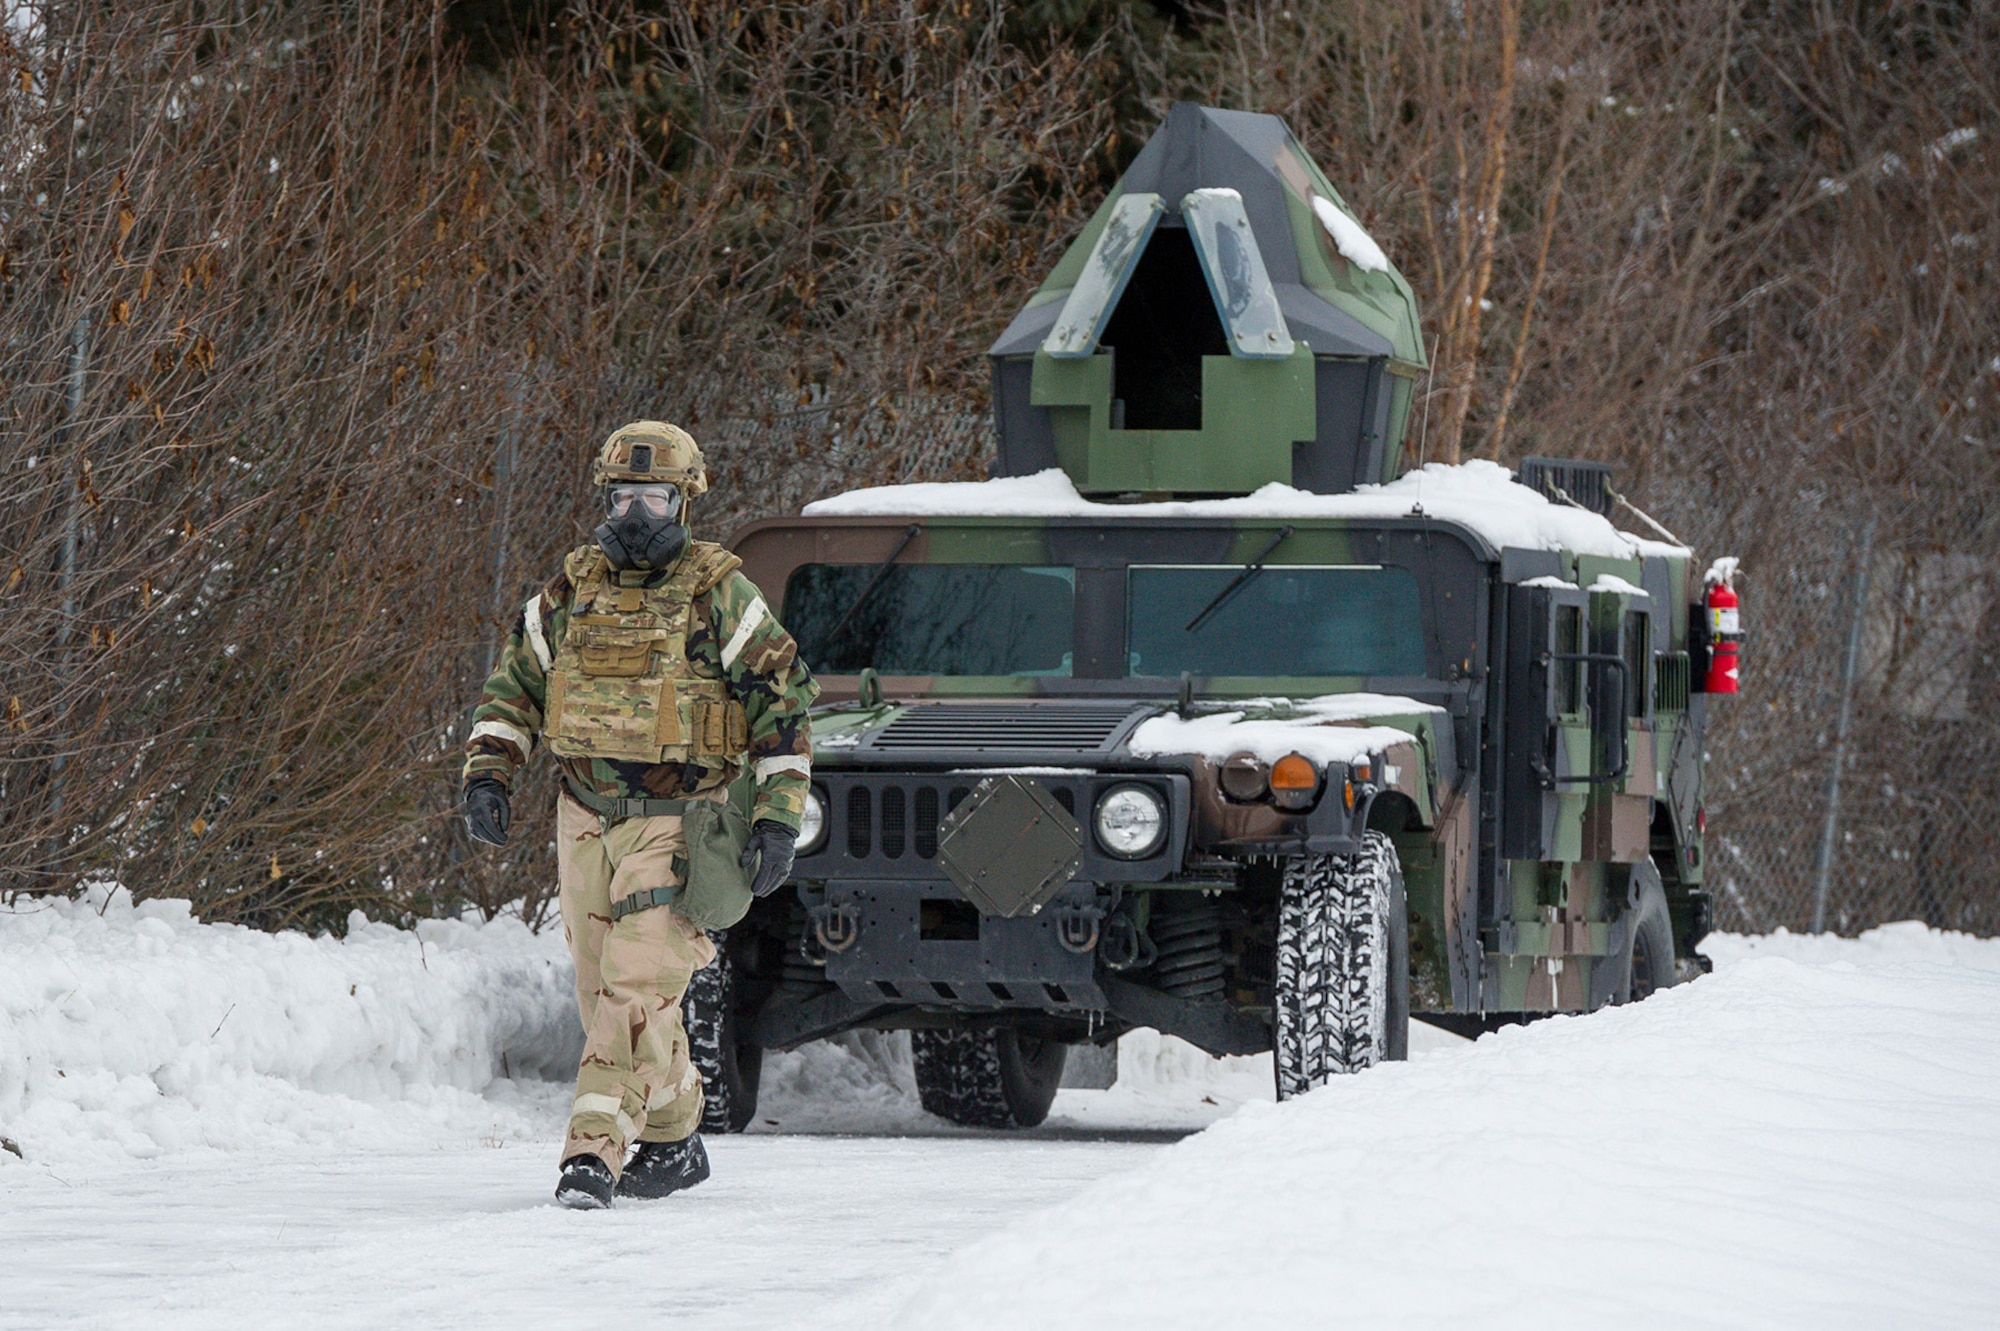 Senior Master Sgt. Ronald White, assigned to the 673d Civil Engineer Squadron, Explosives Ordinance Disposal Flight, walks in front of an armored HMMWV before observing his Airmen conducting a live-fire demolitions exercise in Mission Oriented Protective Posture 4 on Joint Base Elmendorf-Richardson, Alaska, Feb.14, 2018.  The Airmen were conducting EOD training in a simulated chemical weapons contaminated environment.